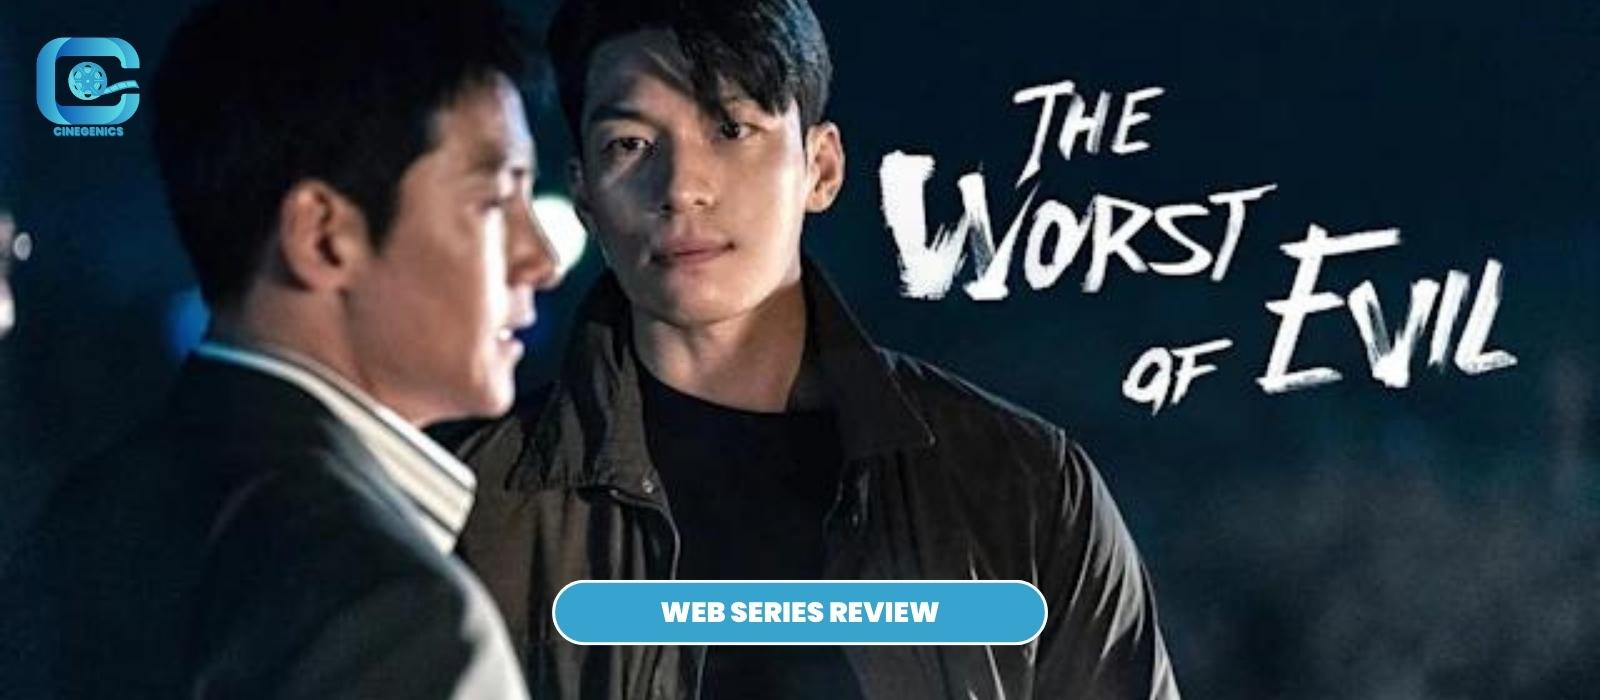 the worst of evil web series review | Movie Review Blogs